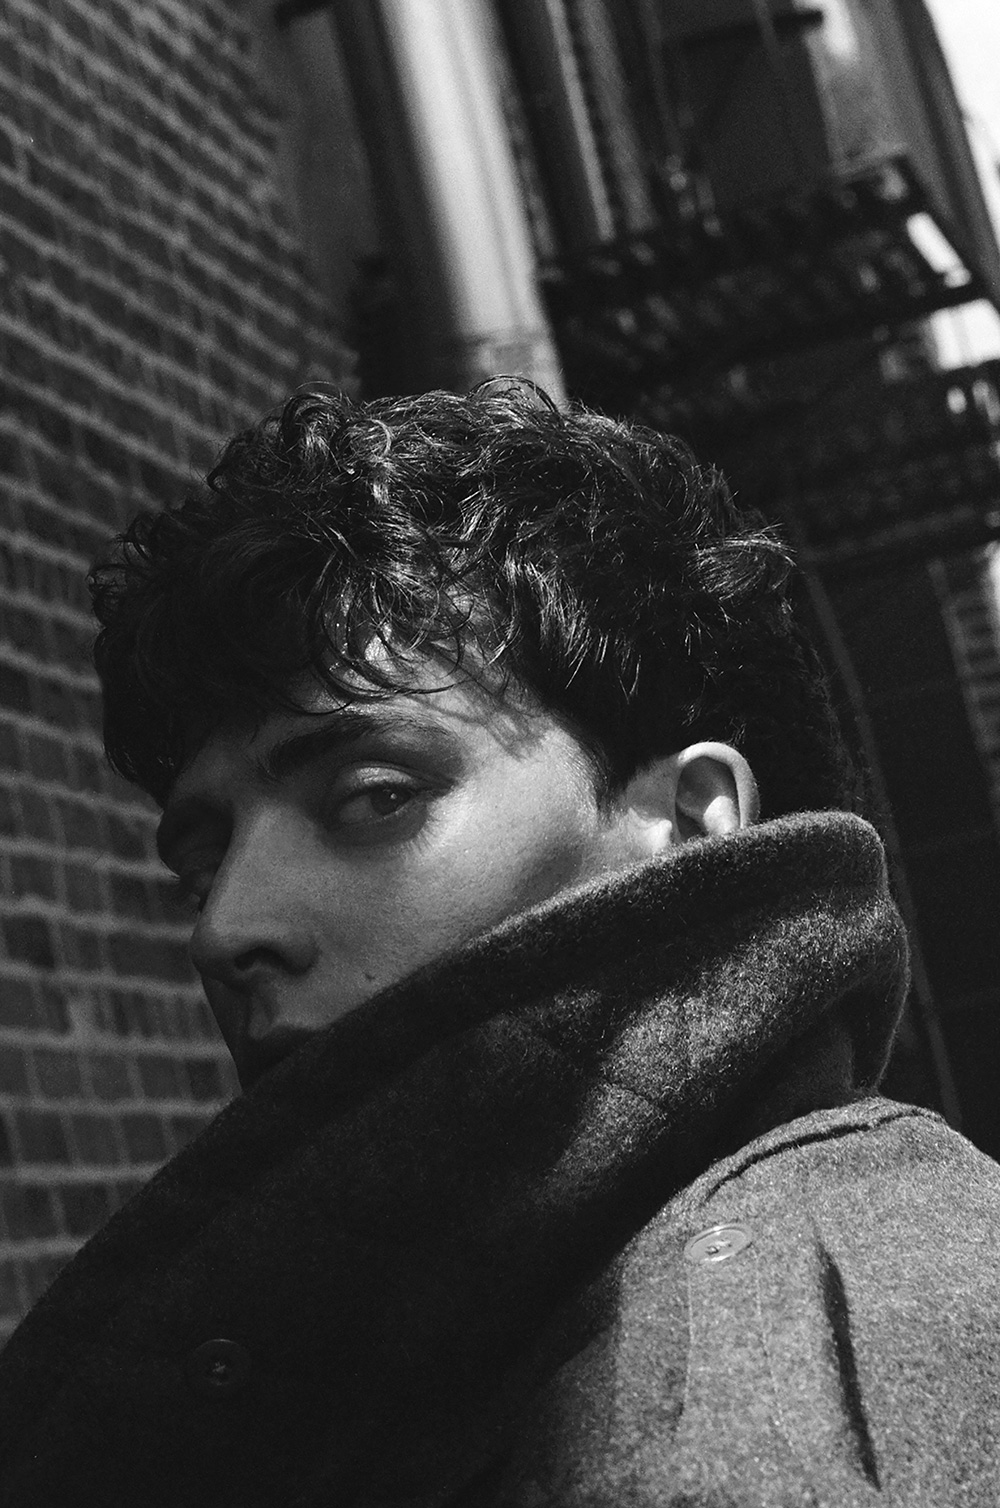 Black and White photo of Aneurin Barnard by Francesco Barion.